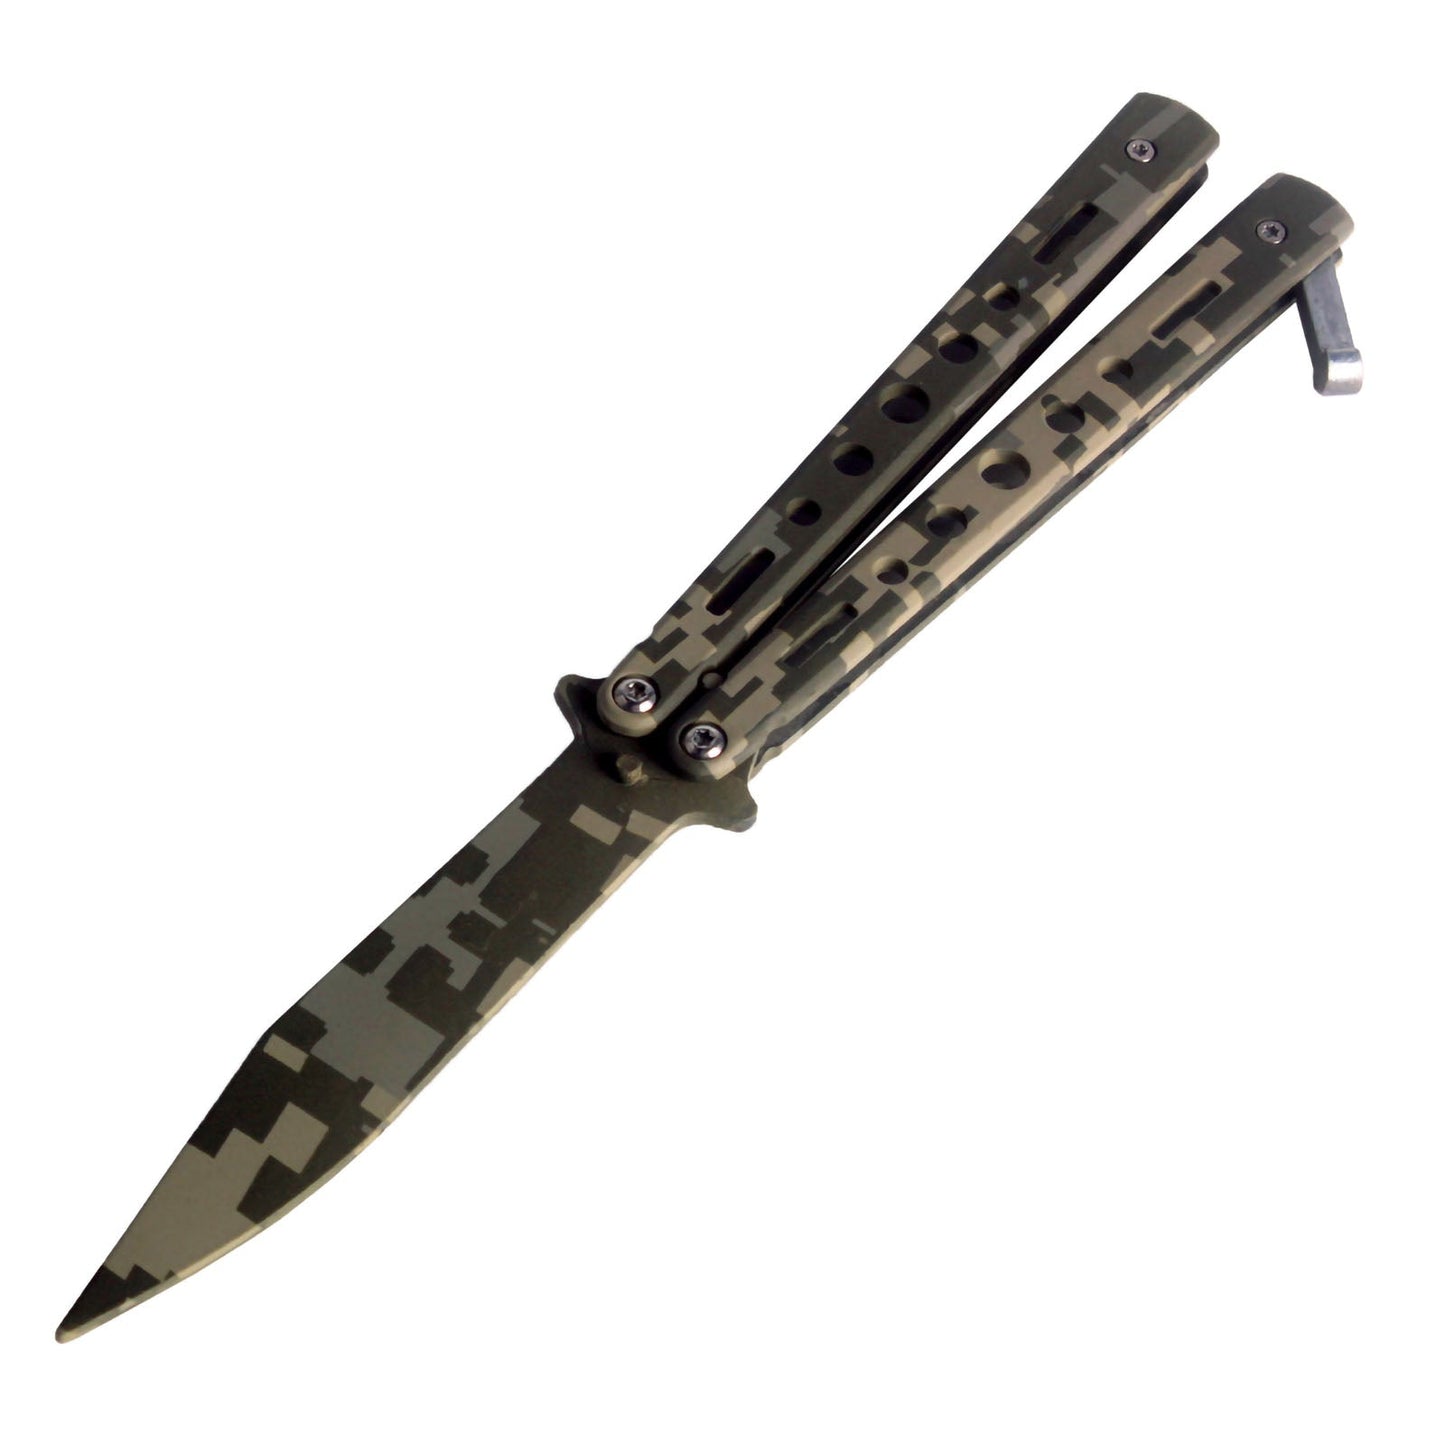 Andux Balisong Practice Trainer CS/HDD12 (Green)(ONLY Available in EU Countries)